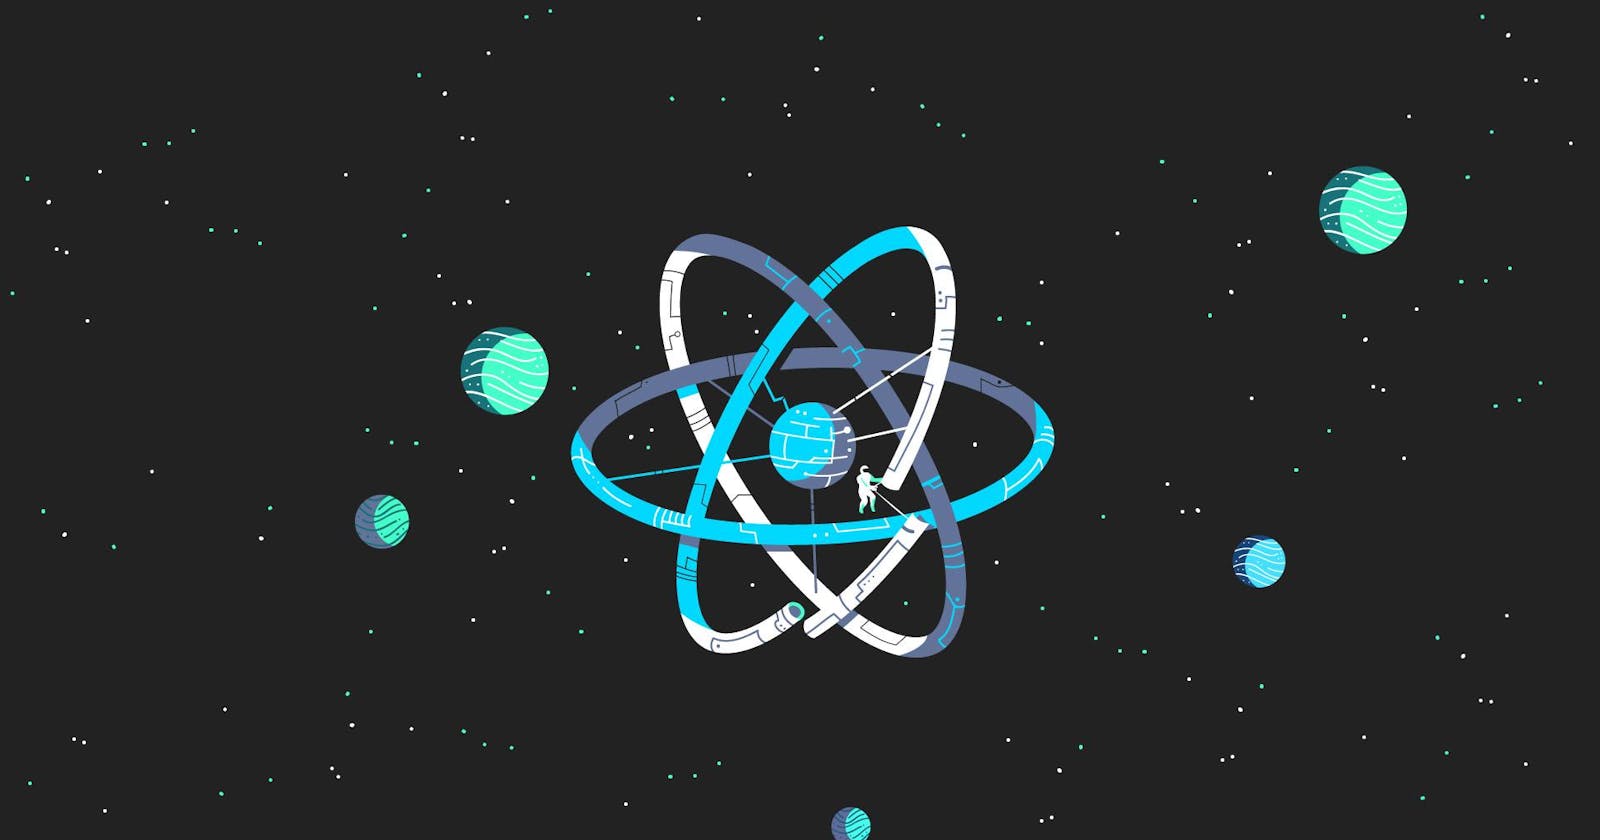 How to Run Your React App?